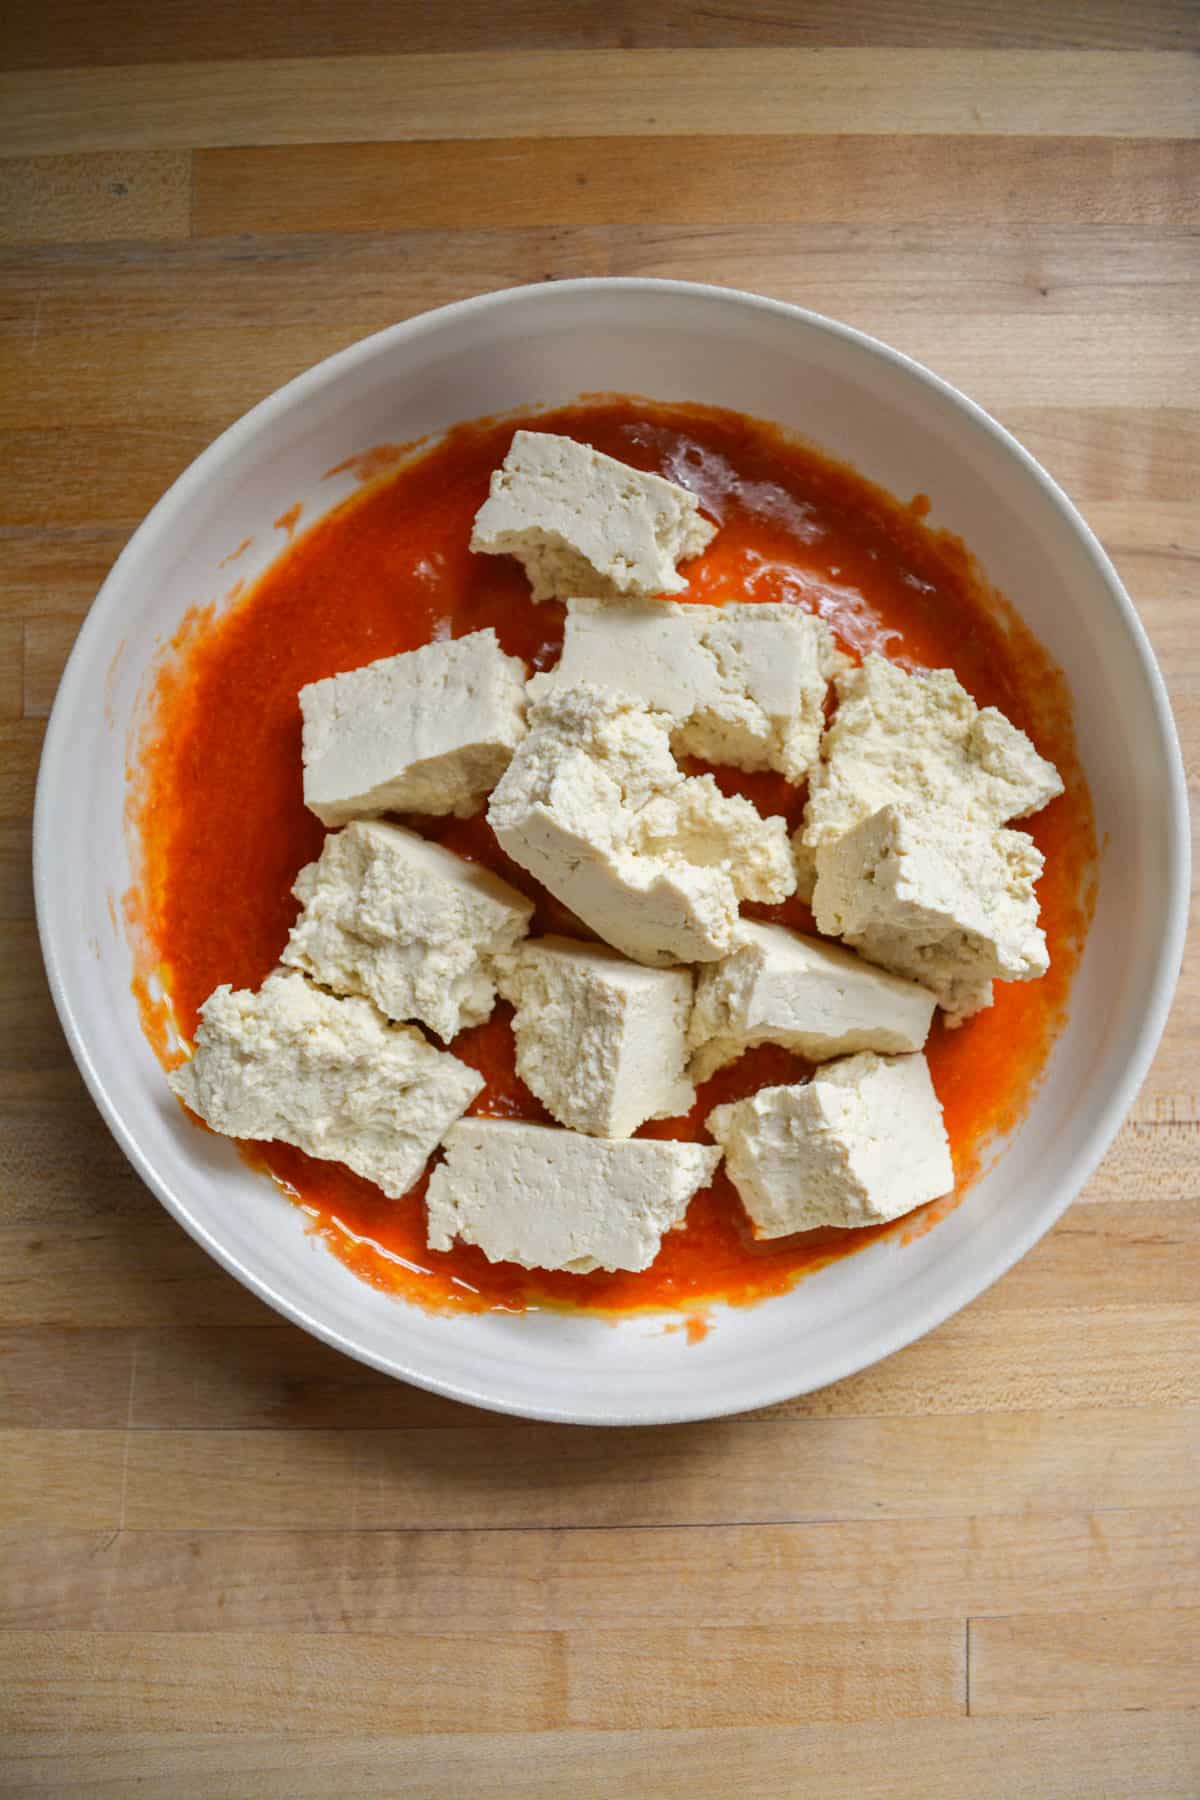 Ripped tofu chunks in the bowl with the buffalo sauce.